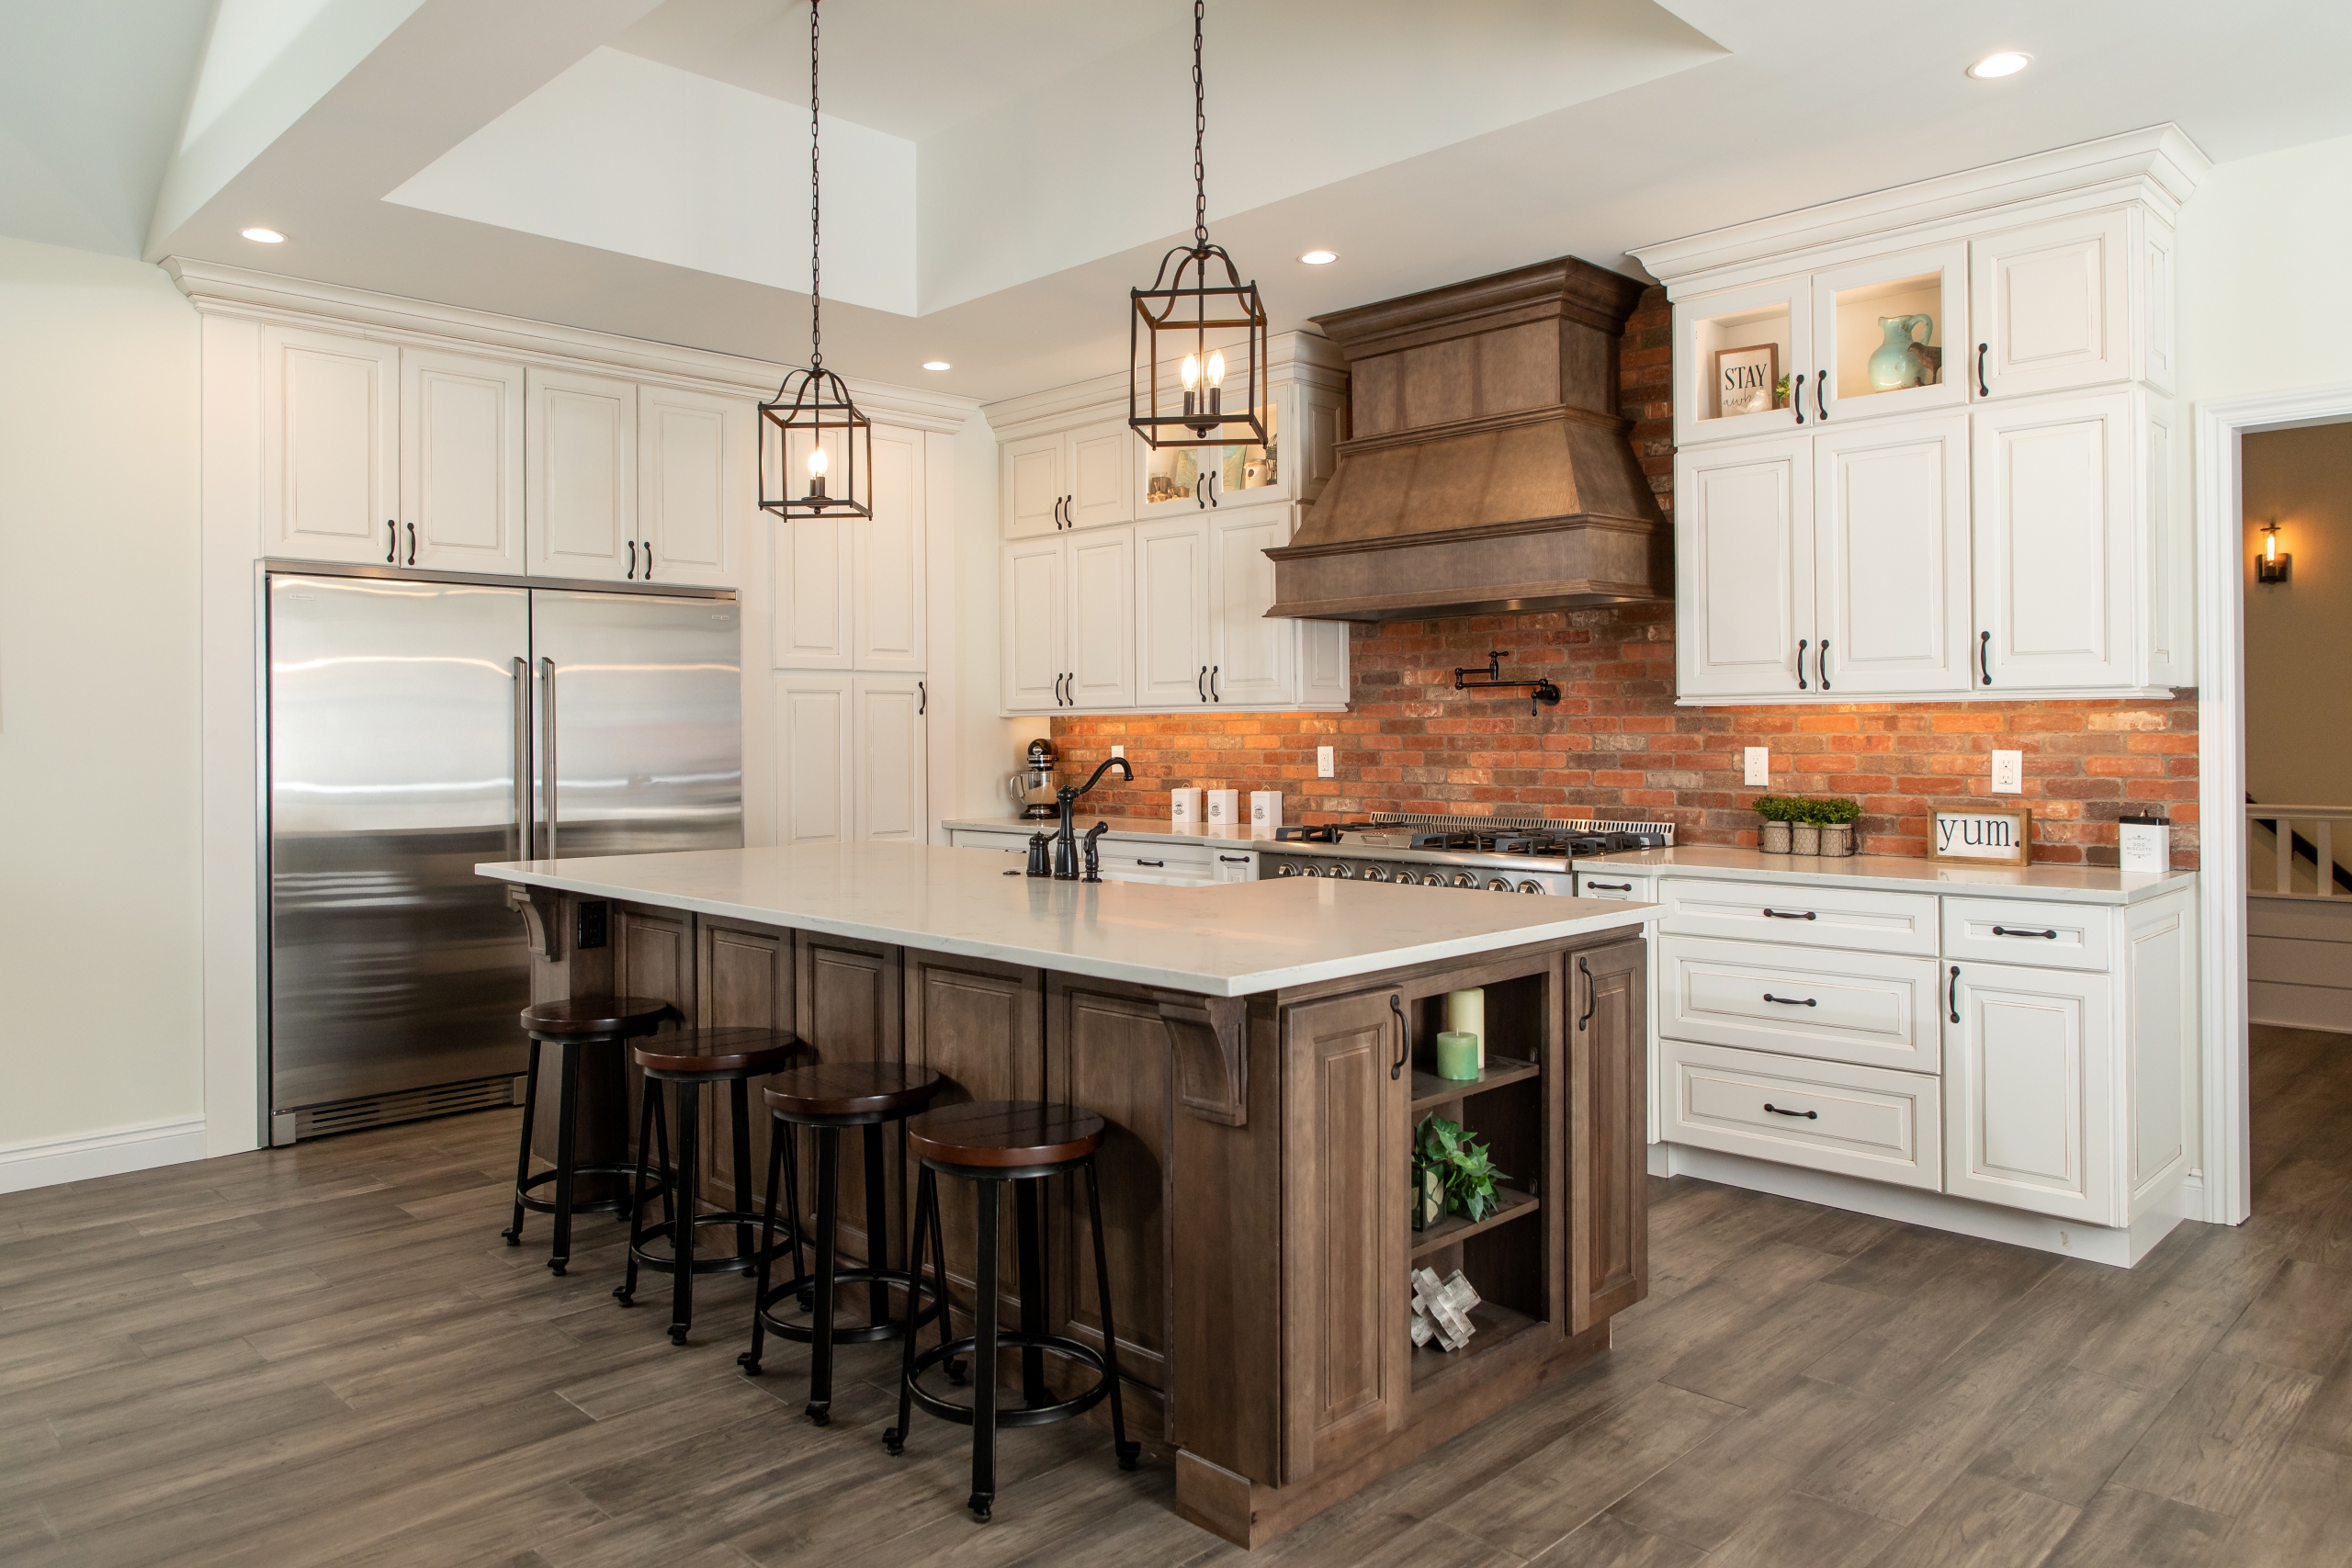 Woodline Building Company Project: Modern Rustic Ranch Kitchen